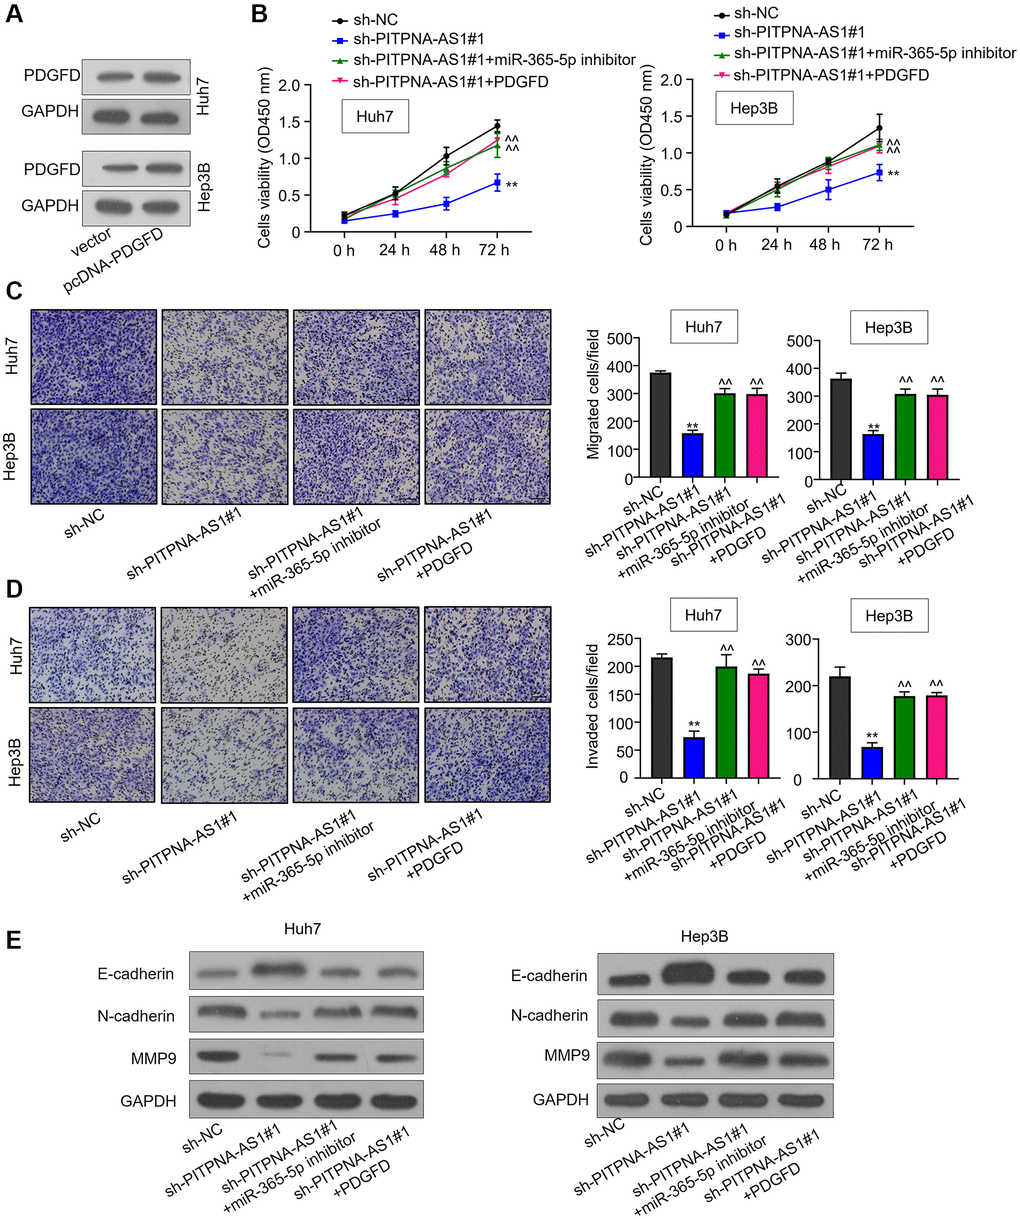 PITPNA-AS1 promotes HCC progression through the miR-363-3p/PDGFD axis. (A) Protein level of PDGFD in Huh7 and Hep3B cells transfected with pcDNA3.1-PDGFD. (B) Cell proliferation of HCC cells transfected with sh-NC, sh-PITPNA-AS1#1, sh-PITPNA-AS1#1+miR-363-5p inhibitor, or sh-PITPNA-AS1#1+miR-363-5p inhibitor + pcDNA3.1-PDGFD was examined by the CCK-8 assay. (C and D) Cell migration and invasion of Huh7 and Hep3B cells transfected with sh-NC, sh-PITPNA-AS1#1, sh-PITPNA-AS1#1+miR-363-5p inhibitor, or sh-PITPNA-AS1#1+miR-363-5p inhibitor+pcDNA3.1-PDGFD was investigated by the transwell assay. **P ^^P E) EMT-related protein levels of Huh7 and Hep3B cells transfected with sh-NC, sh-PITPNA-AS1#1, sh-PITPNA-AS1#1+miR-363-5p inhibitor, or sh-PITPNA-AS1#1+miR-363-5p inhibitor+pcDNA3.1-PDGFD were determined by western blot.